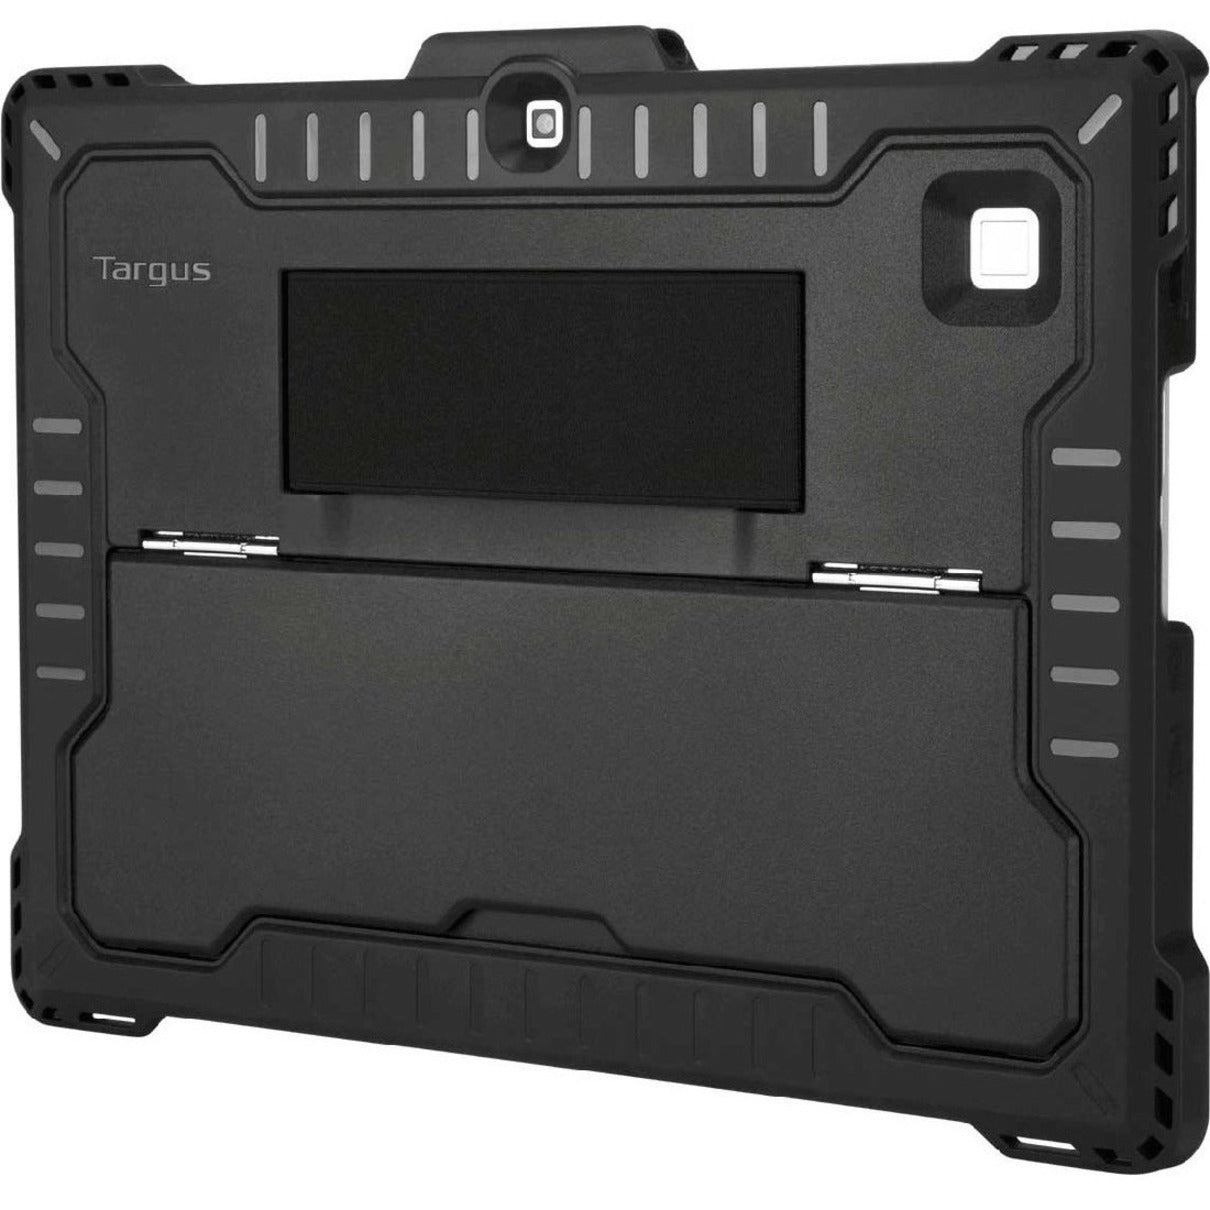 Targus THZ790GL Commercial Grade Tablet Case For HP Elite x2 1013 G3, Rugged Carrying Case for Stylus and Tablet